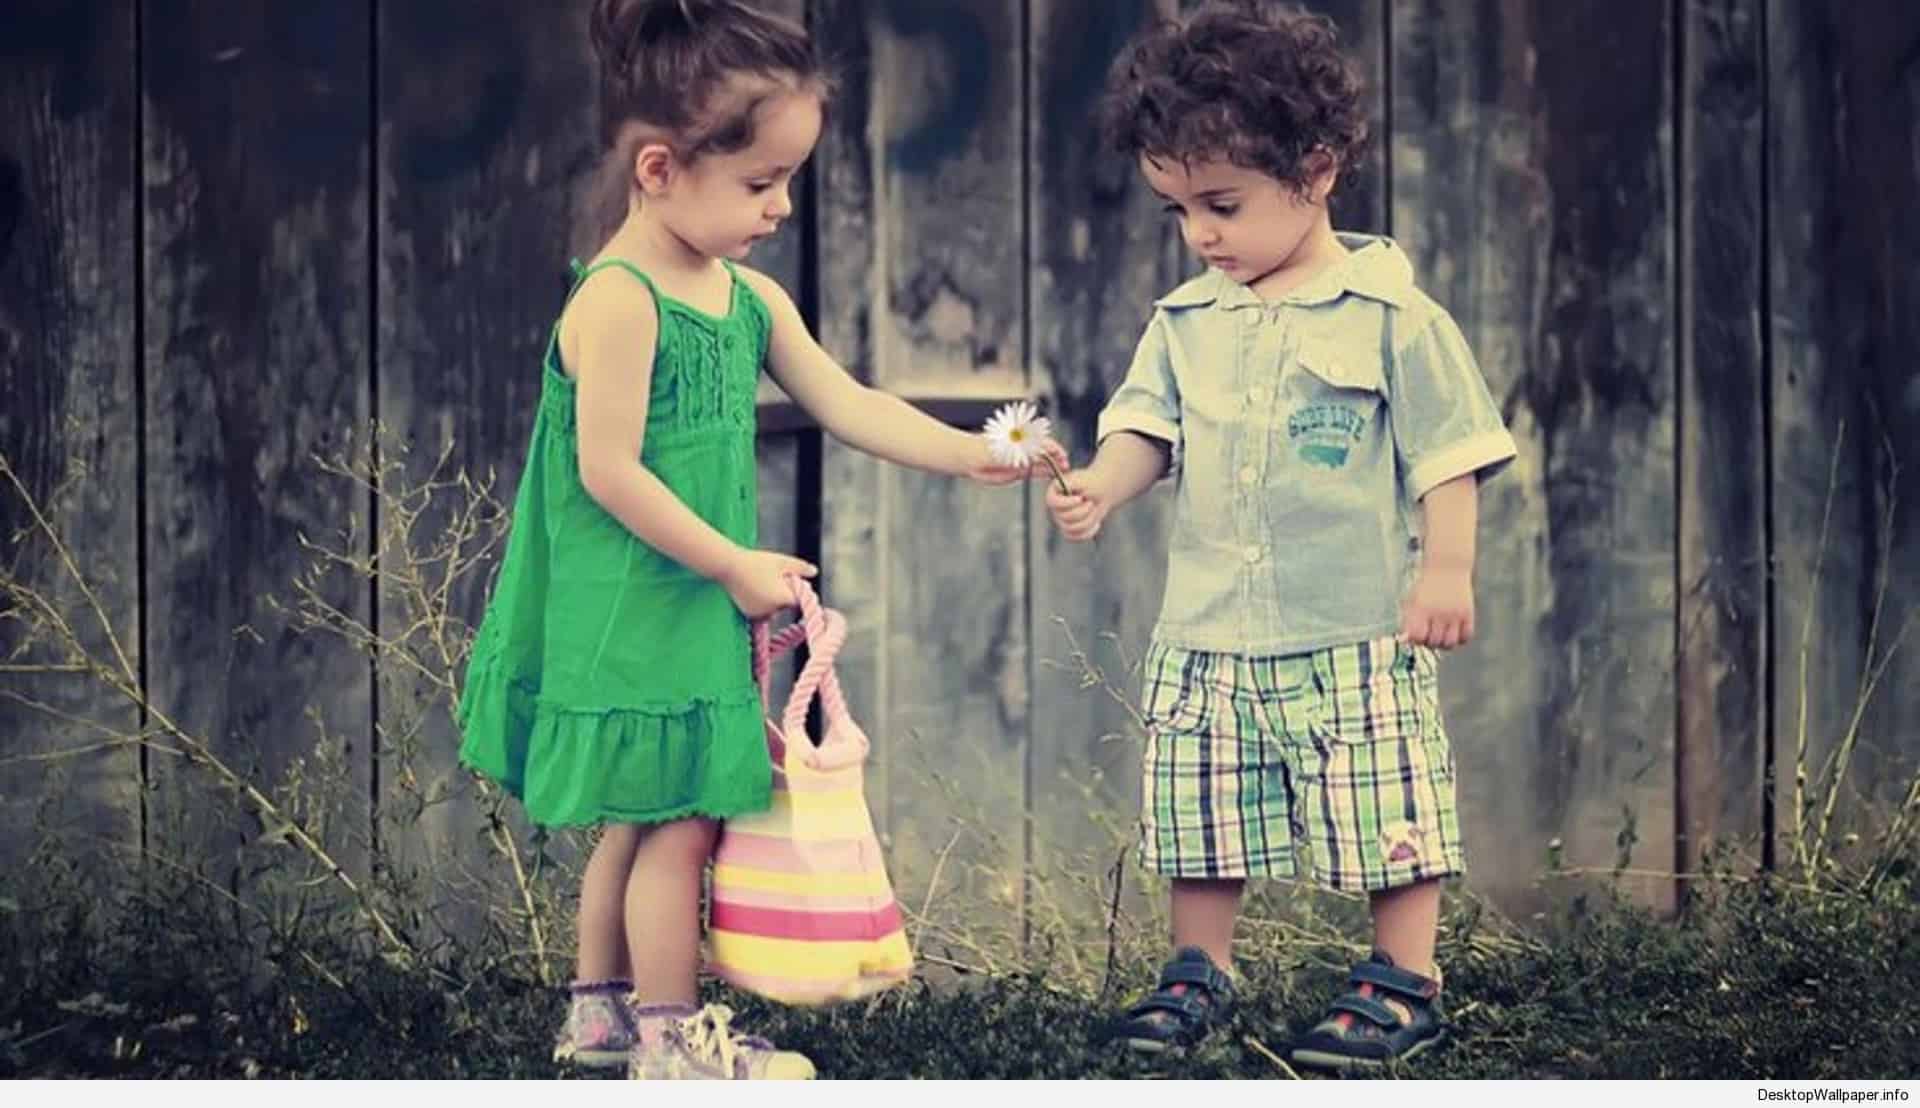 cute baby couple wallpapers for facebook